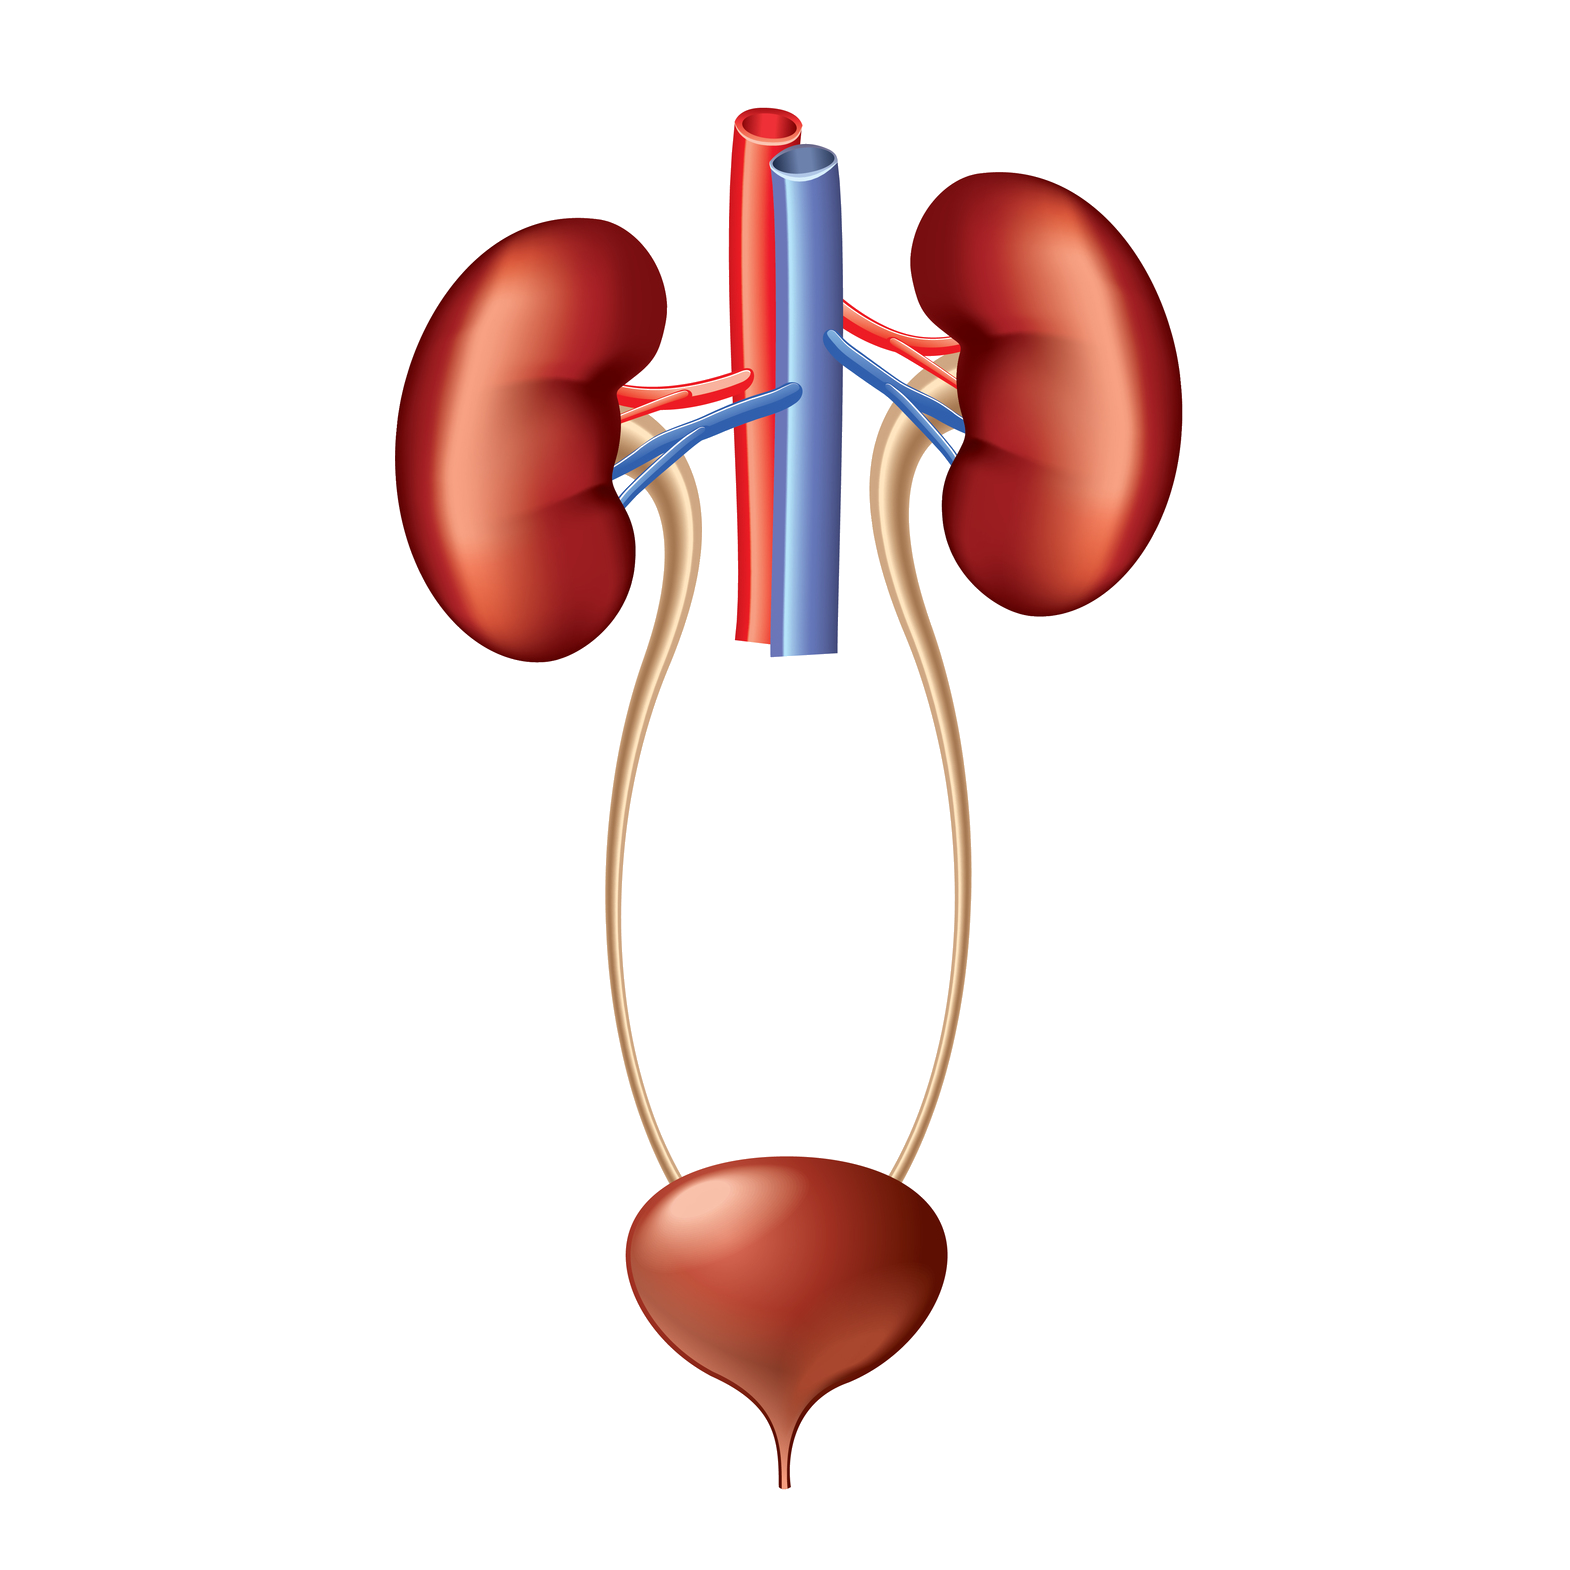 kidney clipart urinary system